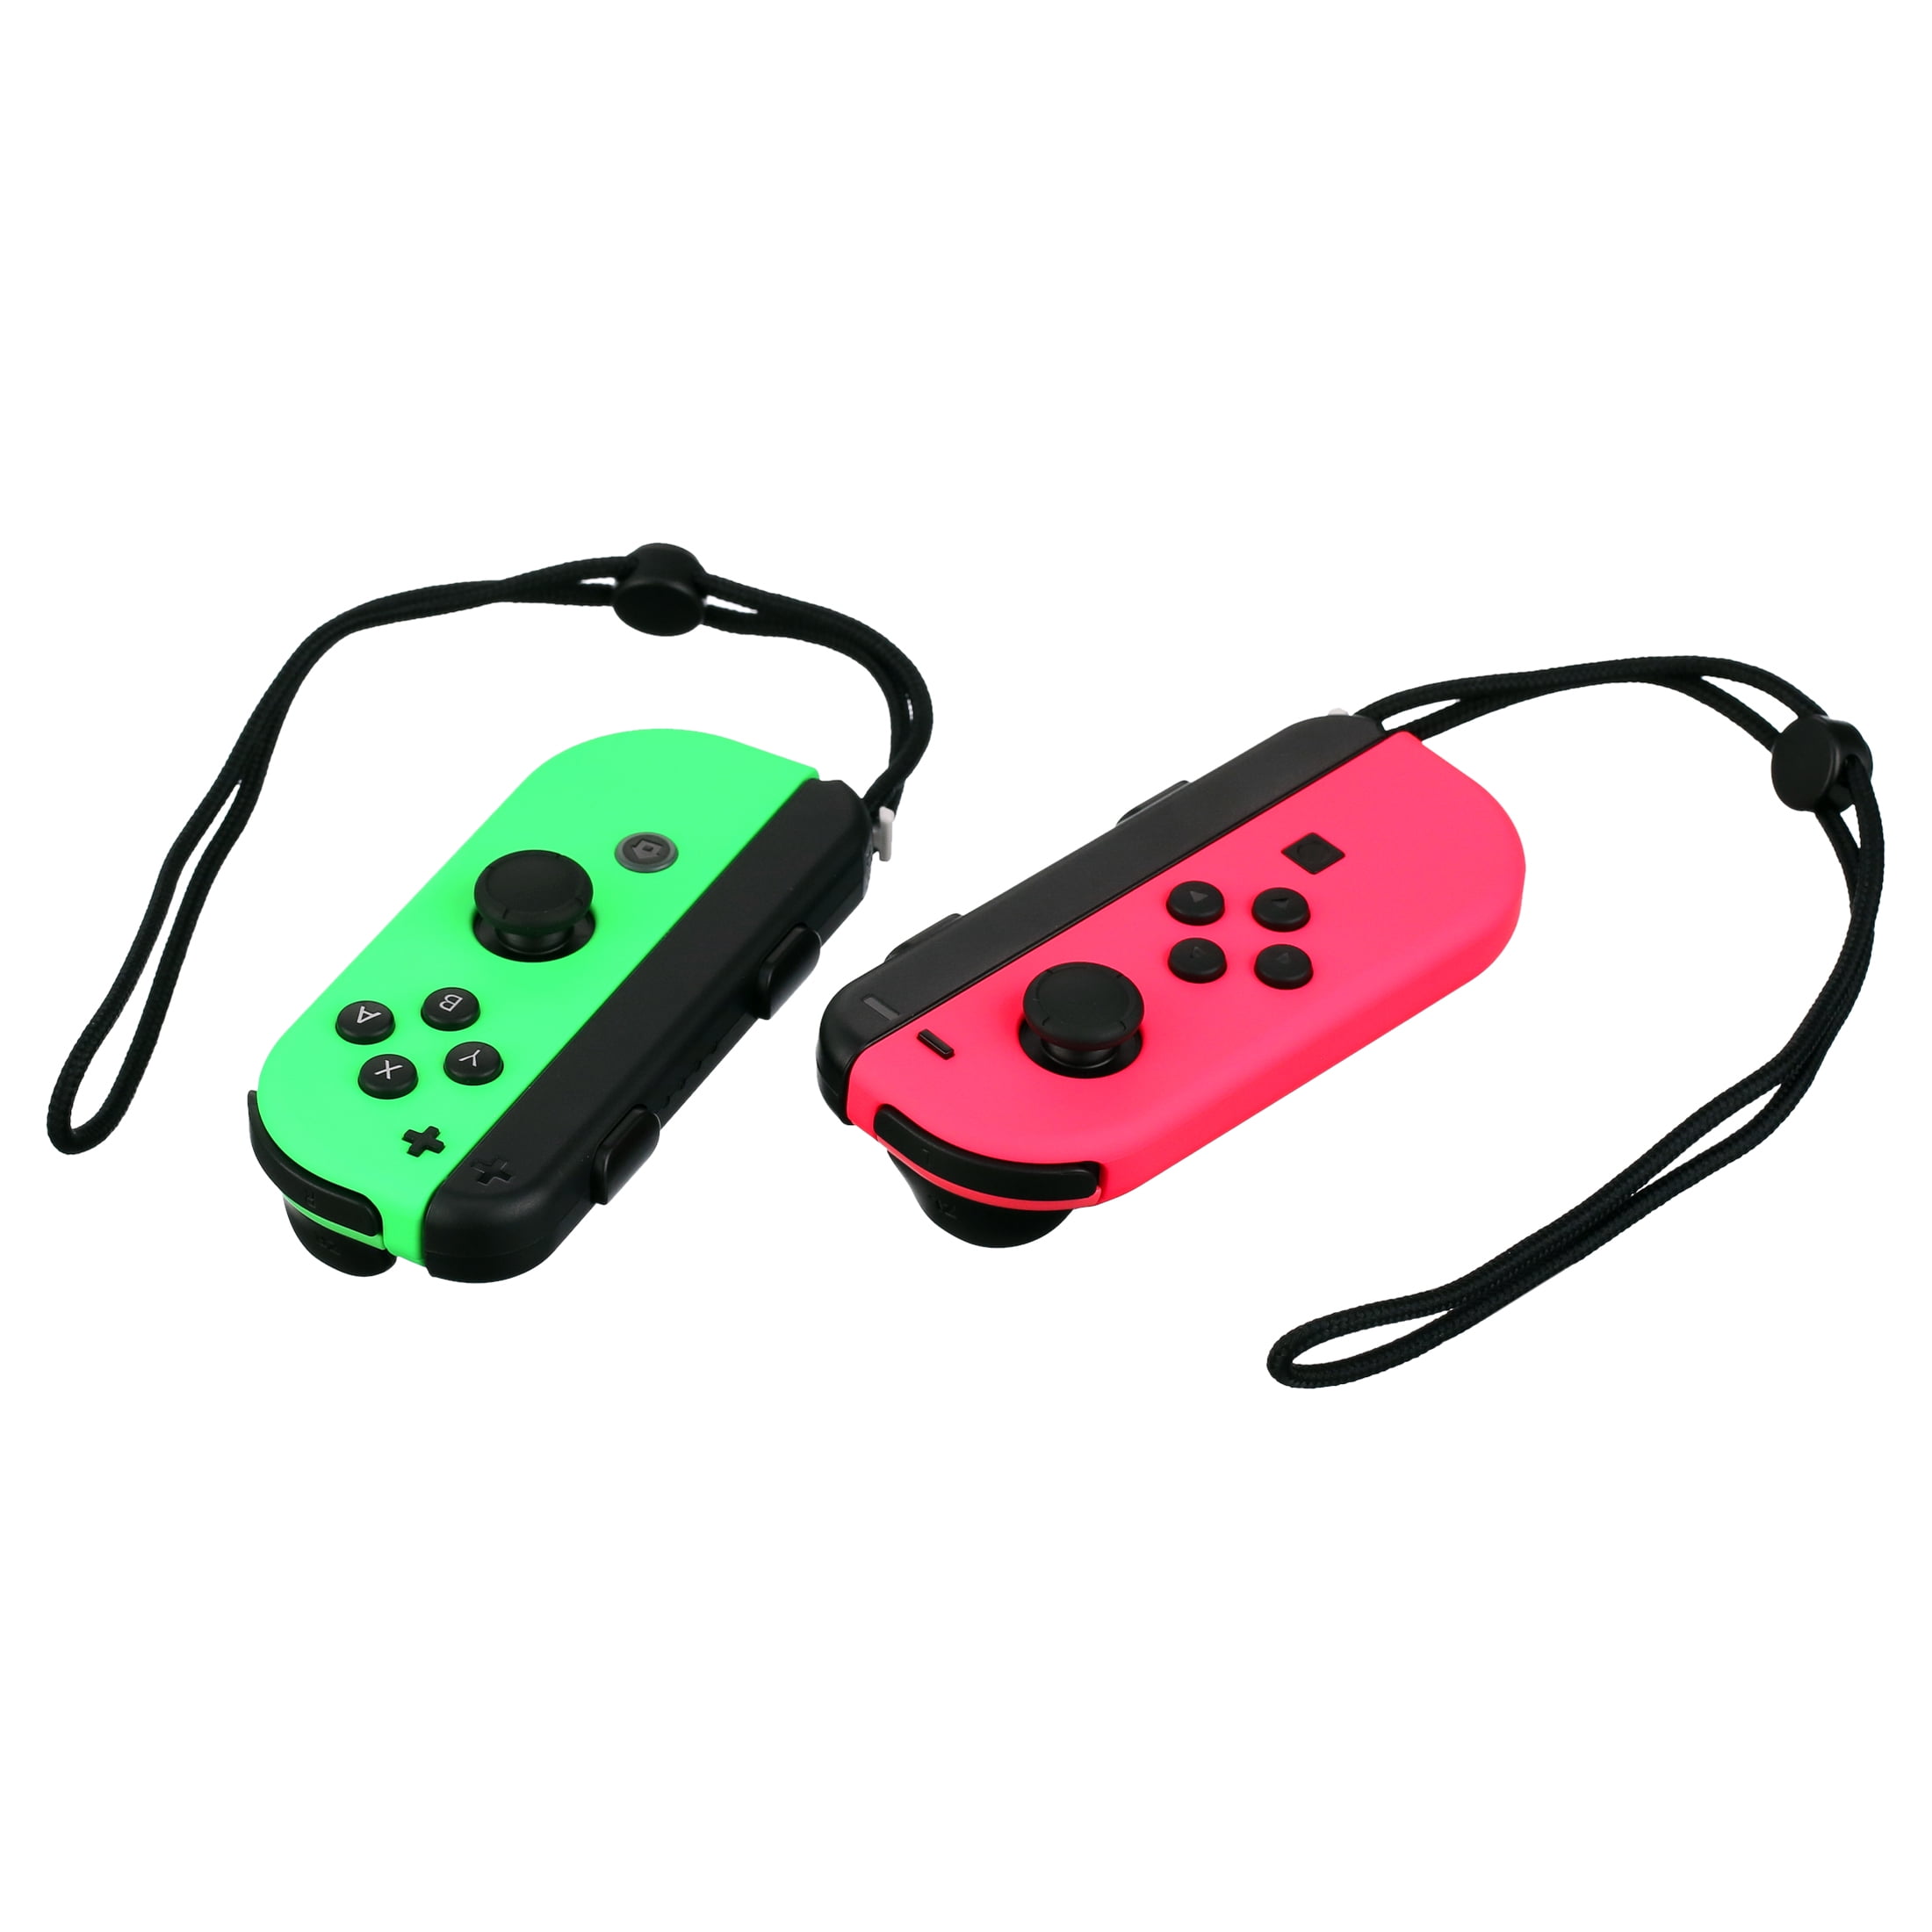 Nintendo Switch Joy-Con Controllers (Neon Green / Neon Pink) for Nintendo  Switch - Bitcoin & Lightning accepted